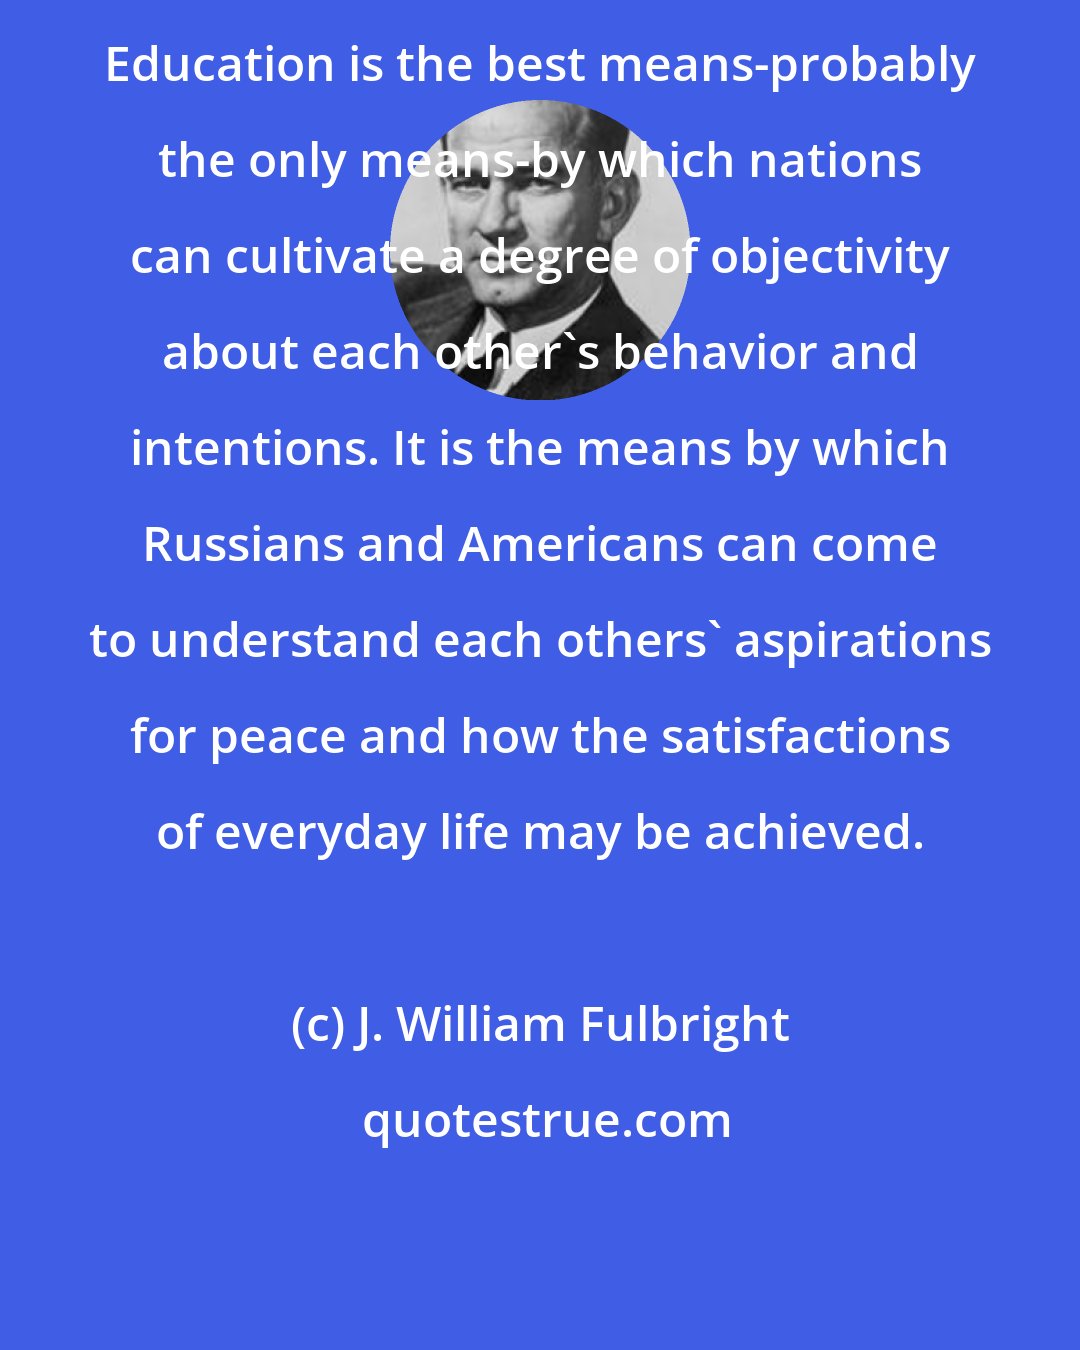 J. William Fulbright: Education is the best means-probably the only means-by which nations can cultivate a degree of objectivity about each other's behavior and intentions. It is the means by which Russians and Americans can come to understand each others' aspirations for peace and how the satisfactions of everyday life may be achieved.